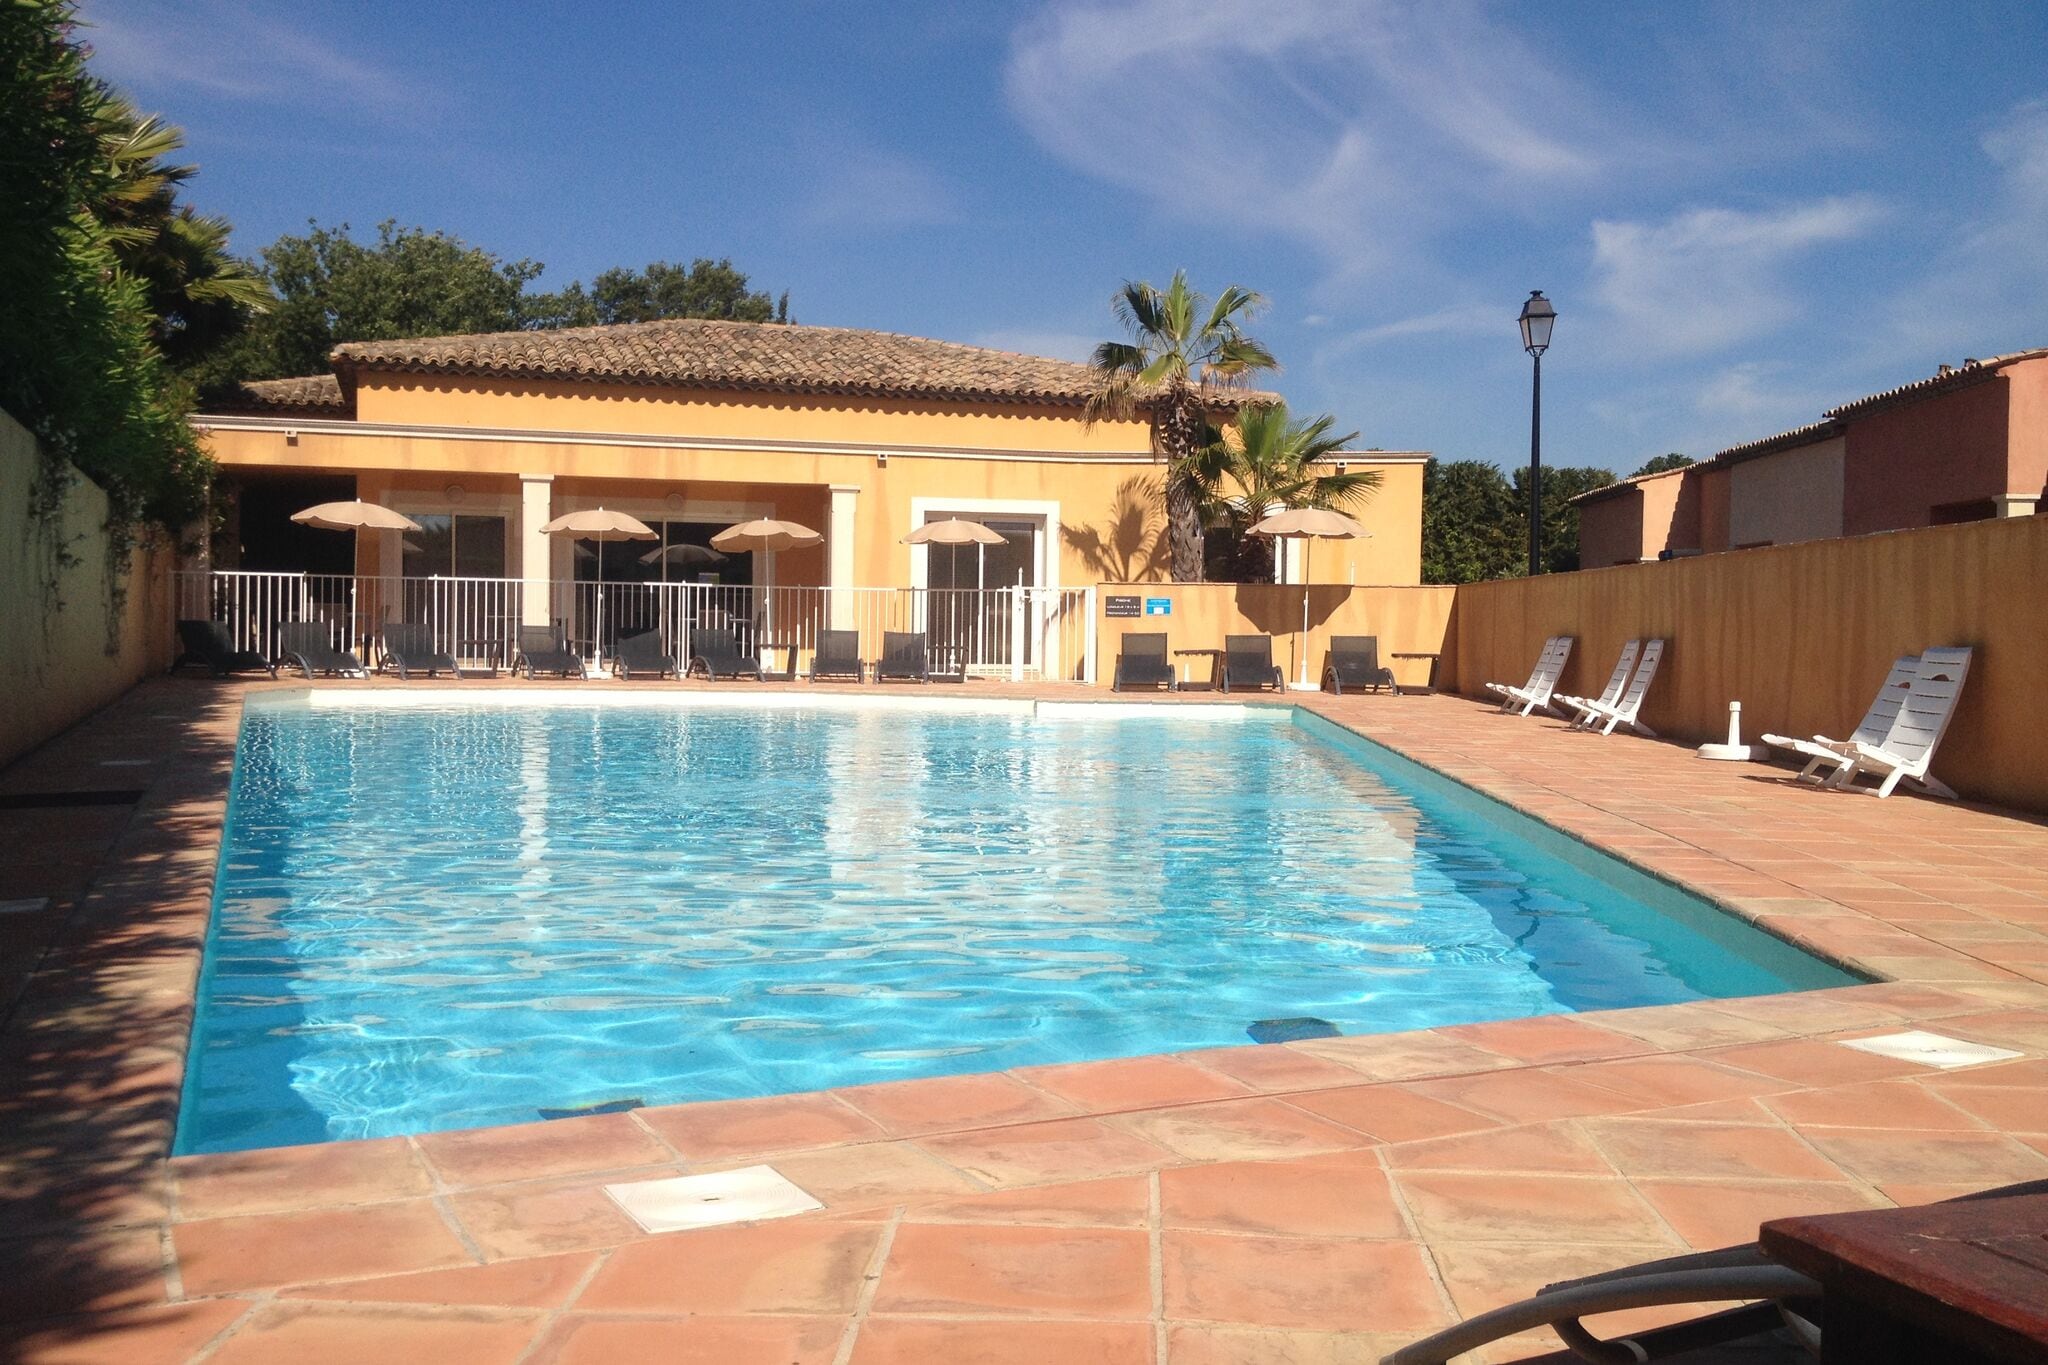 Apartment with AC between Fréjus and the Golf de Saint Tropez